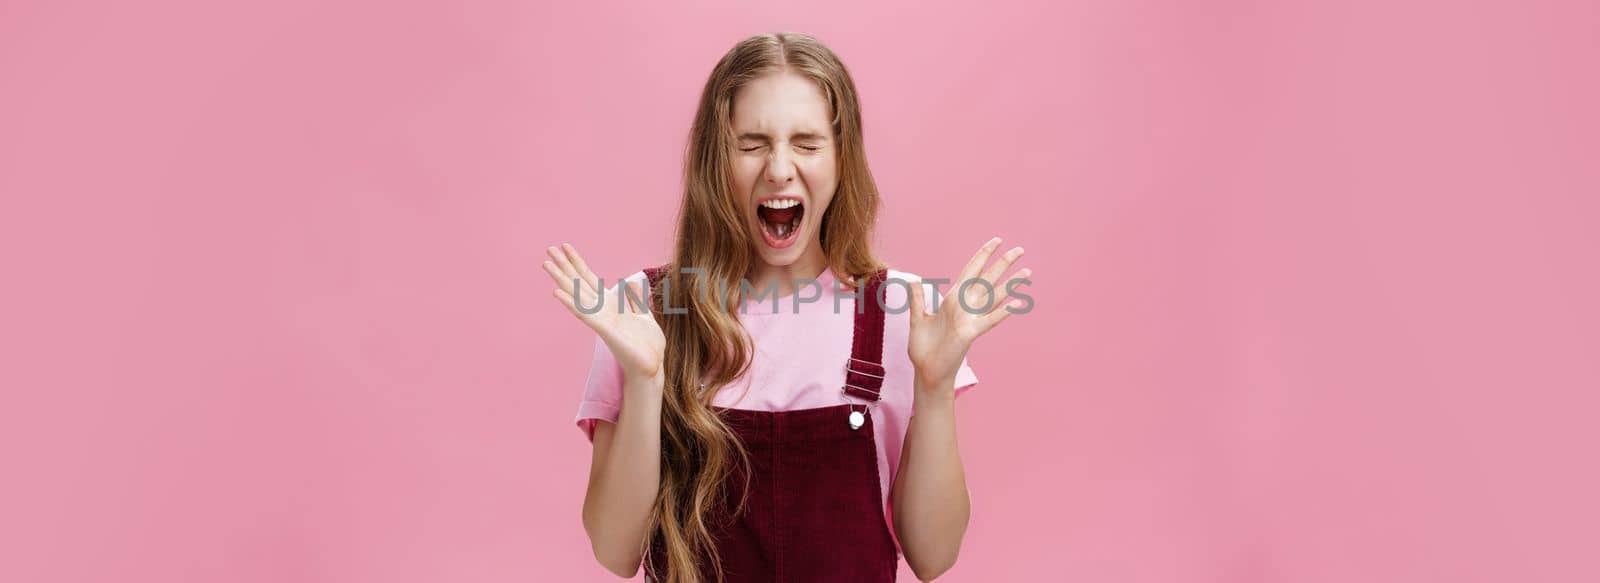 Young girl scared to death seeing spider in room yelling out loud closing eyes and opening mouth gesturing with raised hands near chest feeling afraid and insecure posing against pink background. Copy space